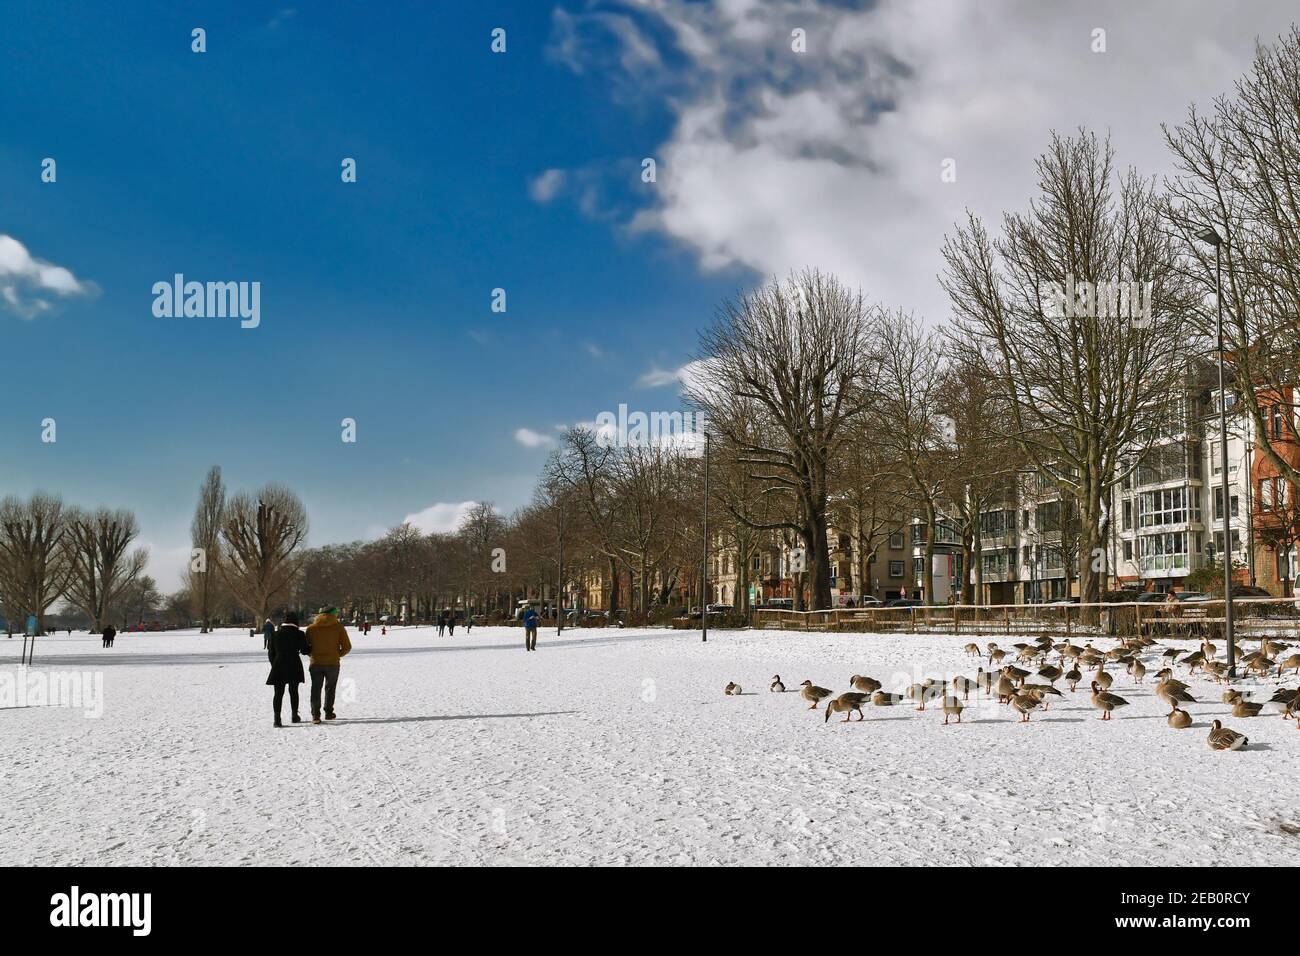 Heidelberg, Germany - February 2021: Lower Neckar river bank called 'Neckarwiese' with big meadow covered in snow, swan gooses and people taking walks Stock Photo